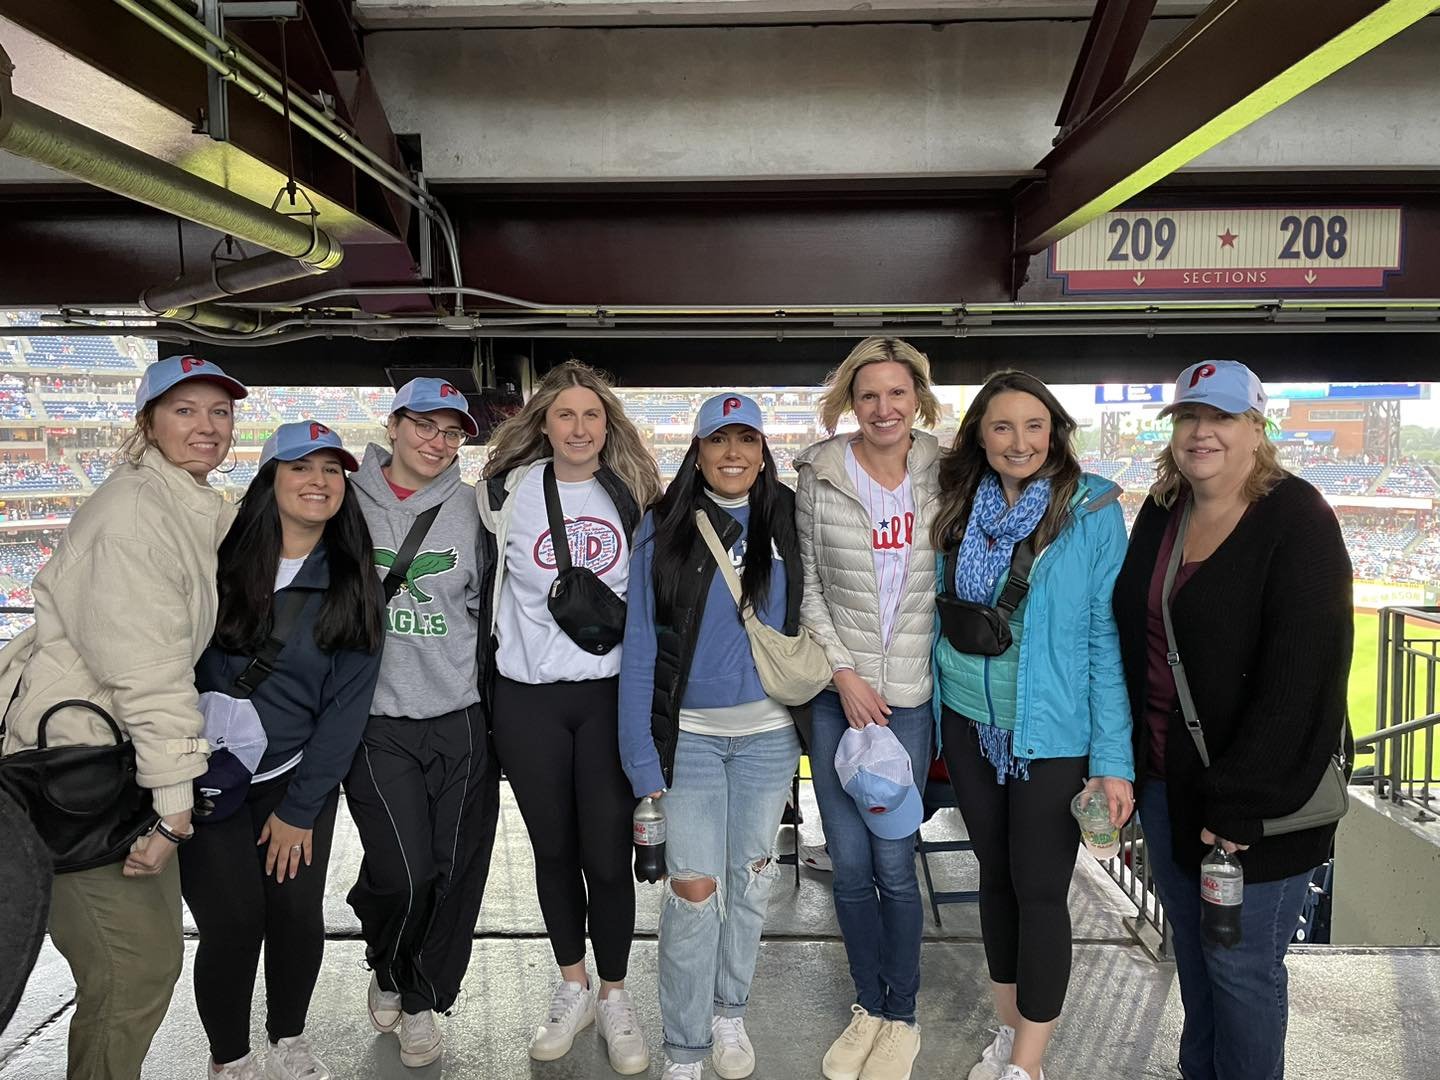 To kick off mental health awareness month Team Serenity attended the Strike Out the Stigma event today prior to the Phillies game. 

Strike Out The Stigma is a Philadelphia Phillies Community Outreach initiative focused on bringing important conversa